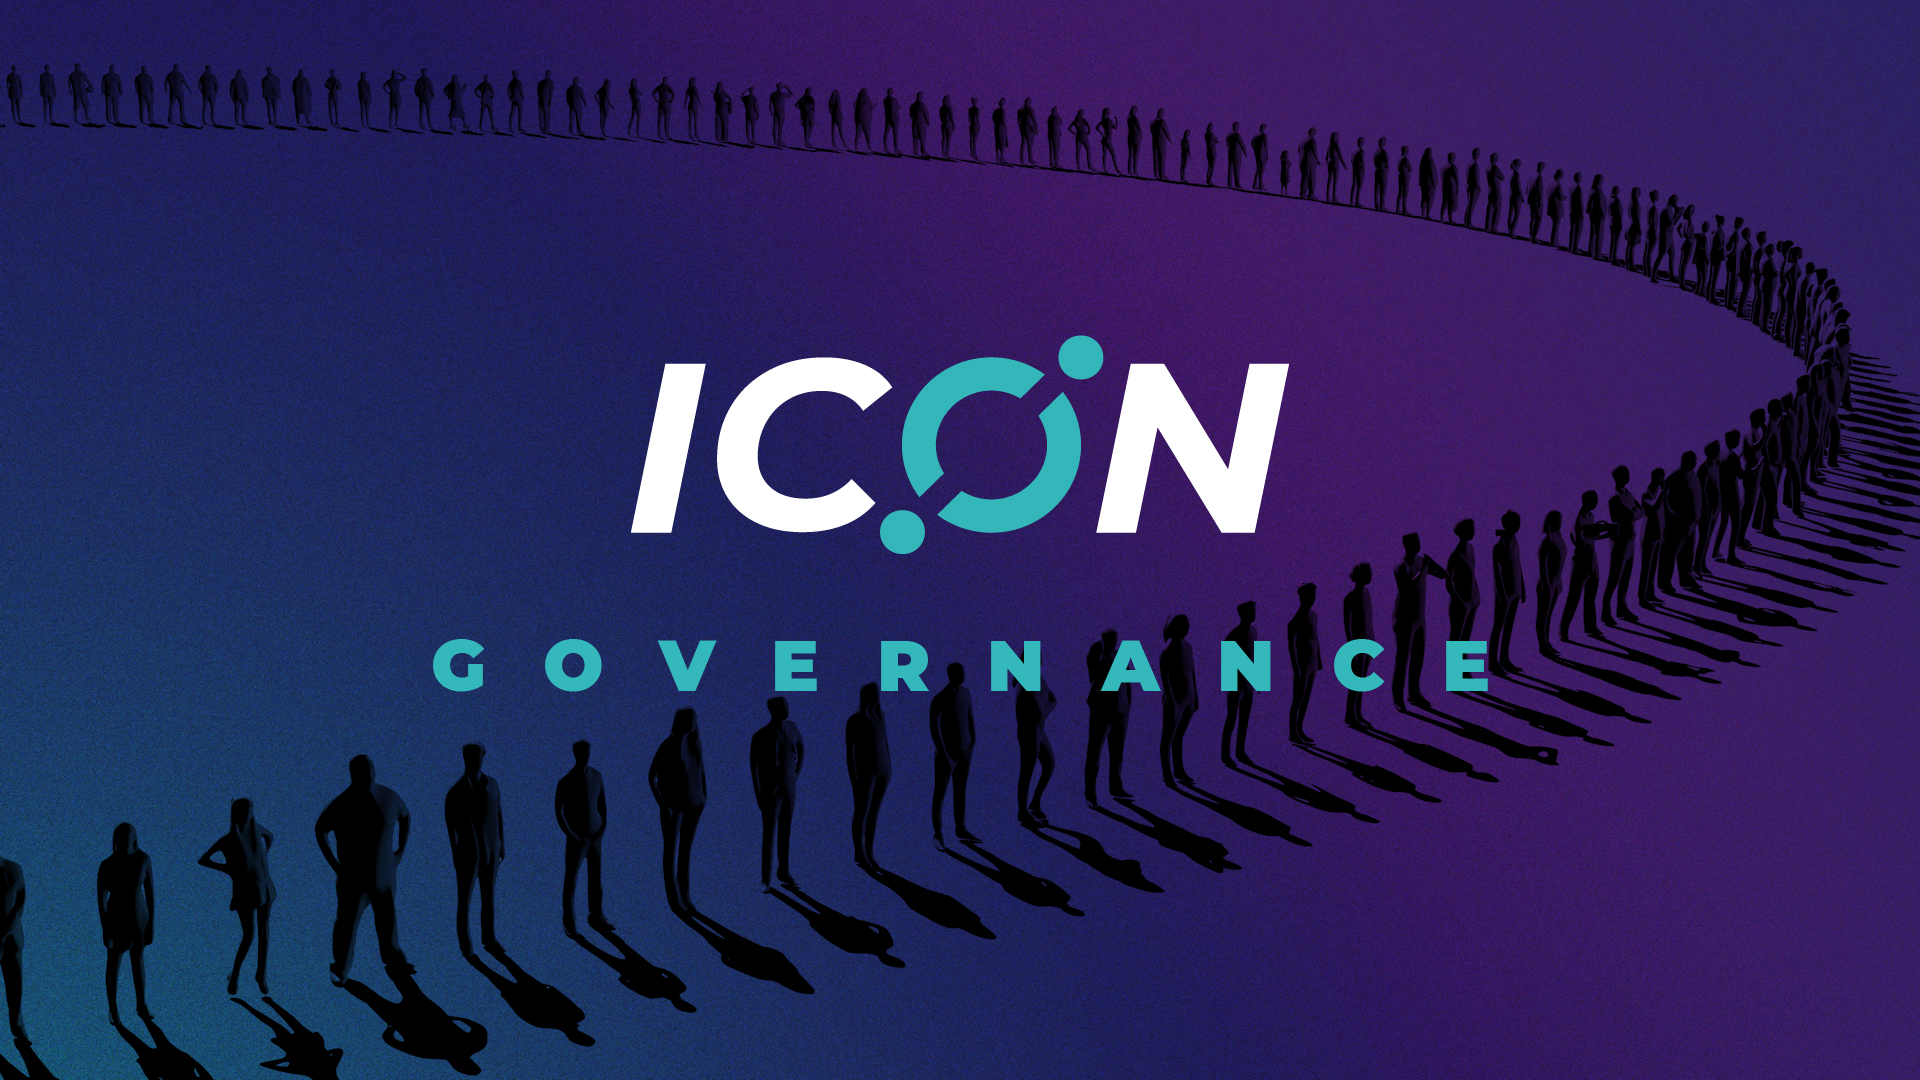 ICON is a DPoS network where stakers delegate ICX to validators that produce blocks and participate in governance.